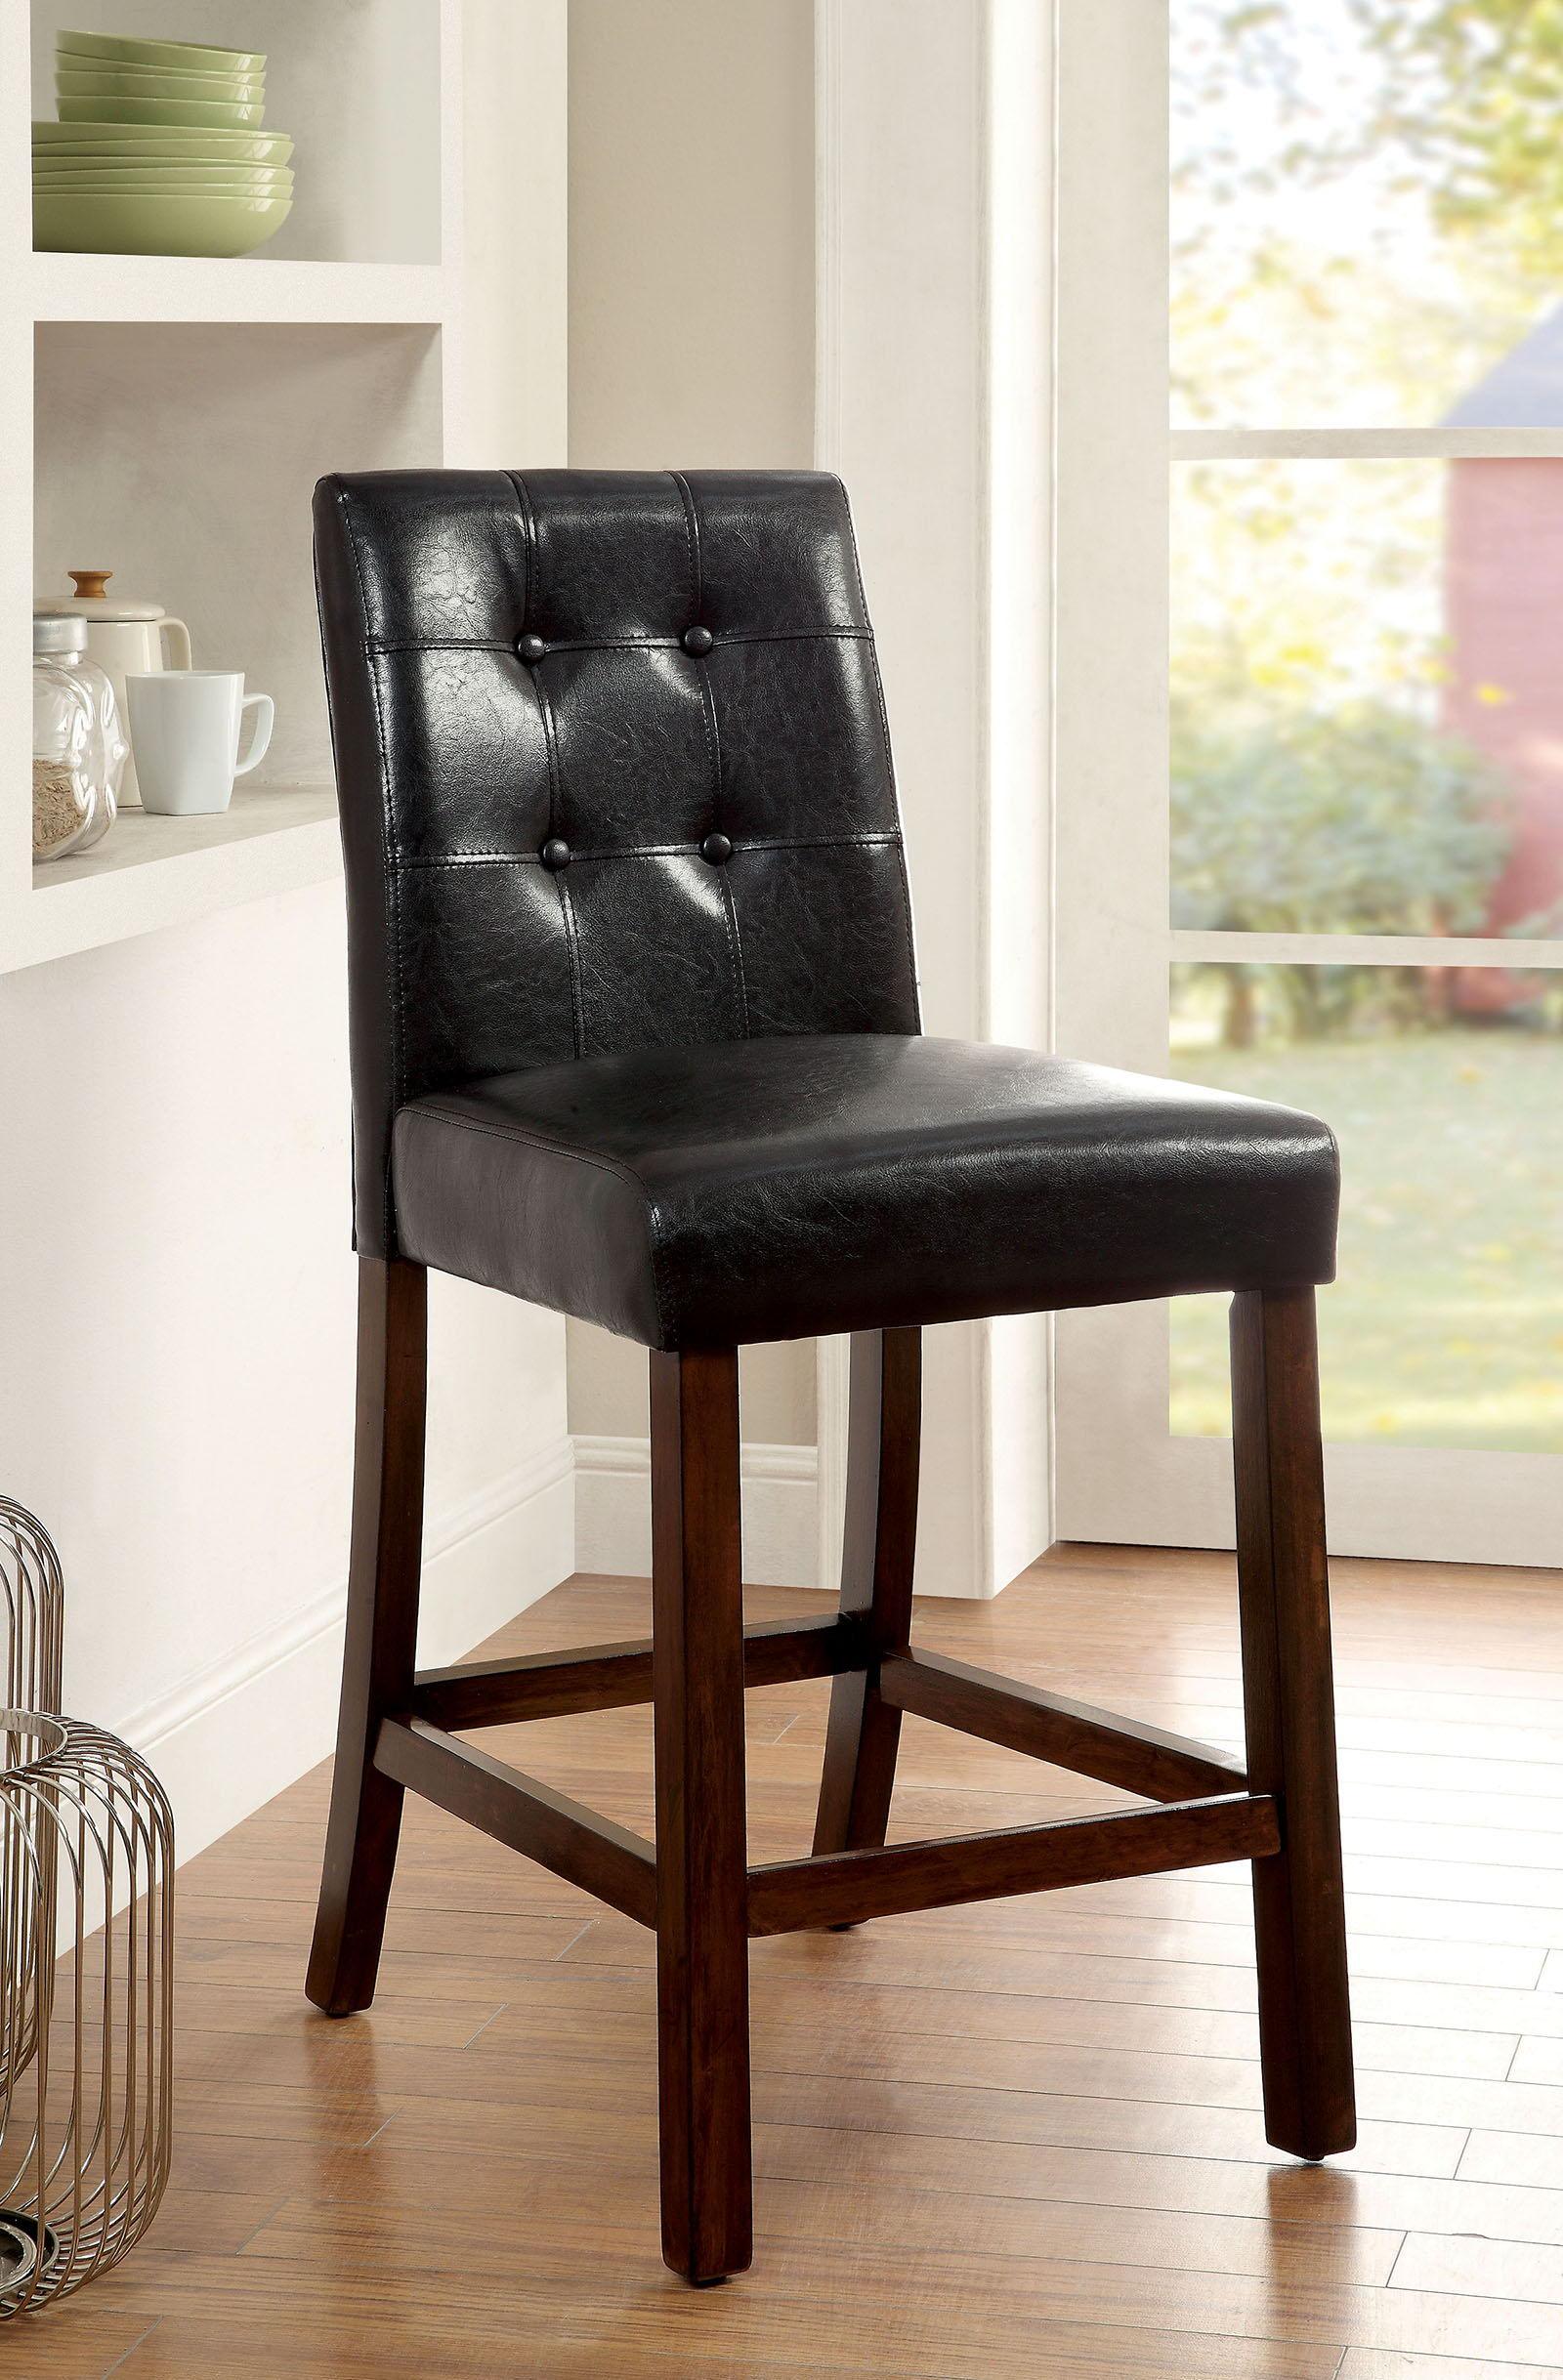 Furniture of America - Marstone - Counter Height Chair (Set of 2) - Brown Cherry / Black - 5th Avenue Furniture